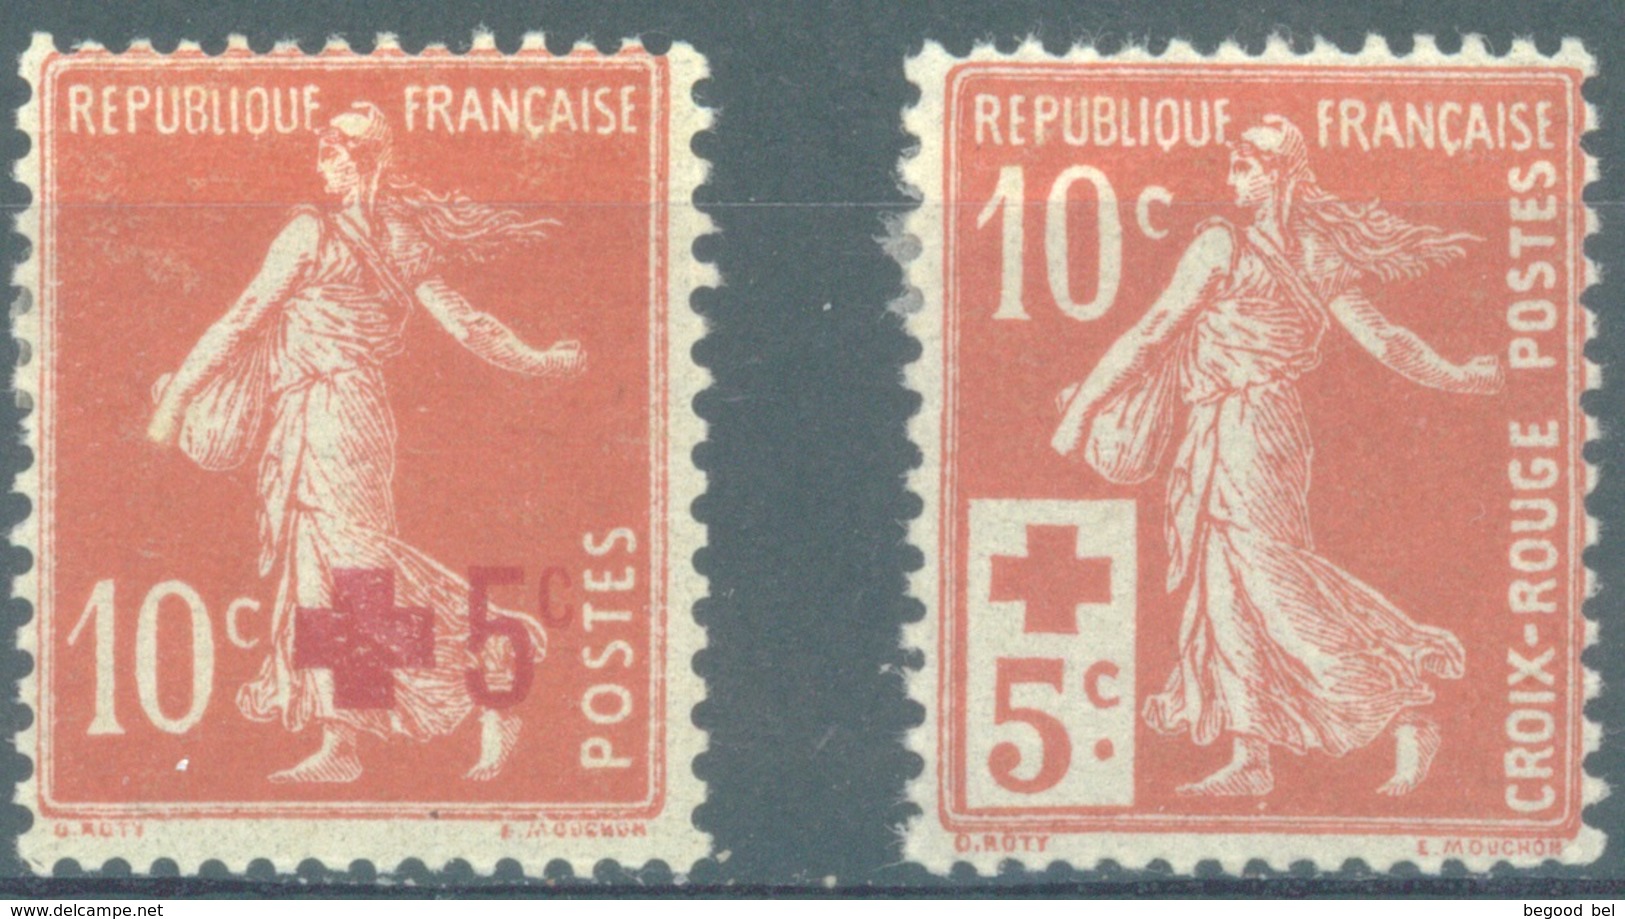 FRANCE - 1914 - MH/* - CROIX ROUGE - Yv 146-147 - Lot 15470 - Ungebraucht